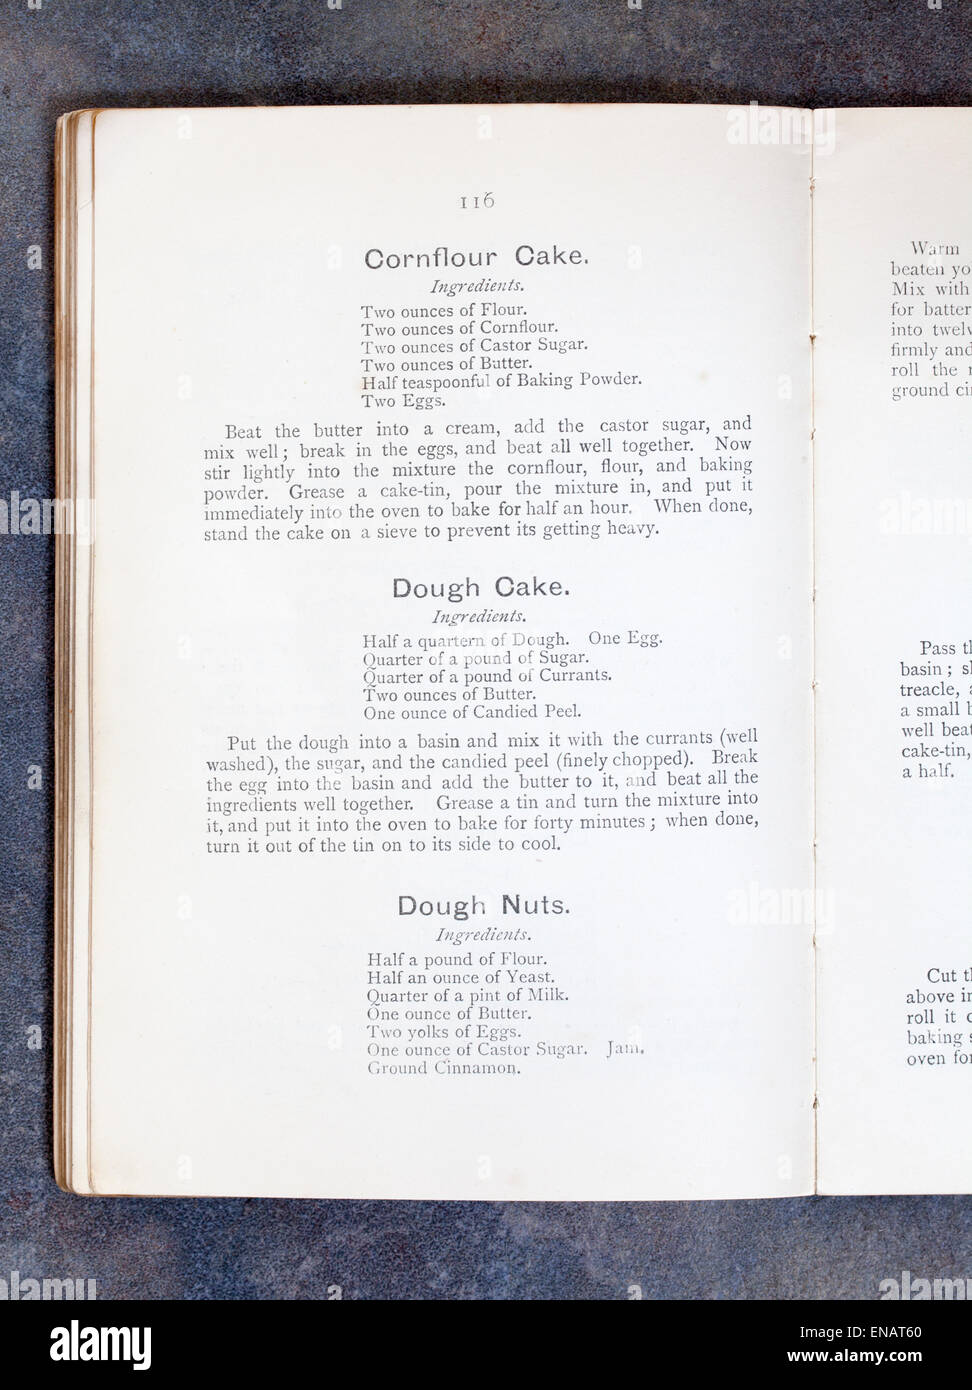 Plain Cookery Recipe Book by Mrs Charles Clarke for the National Training School for Cookery Stock Photo